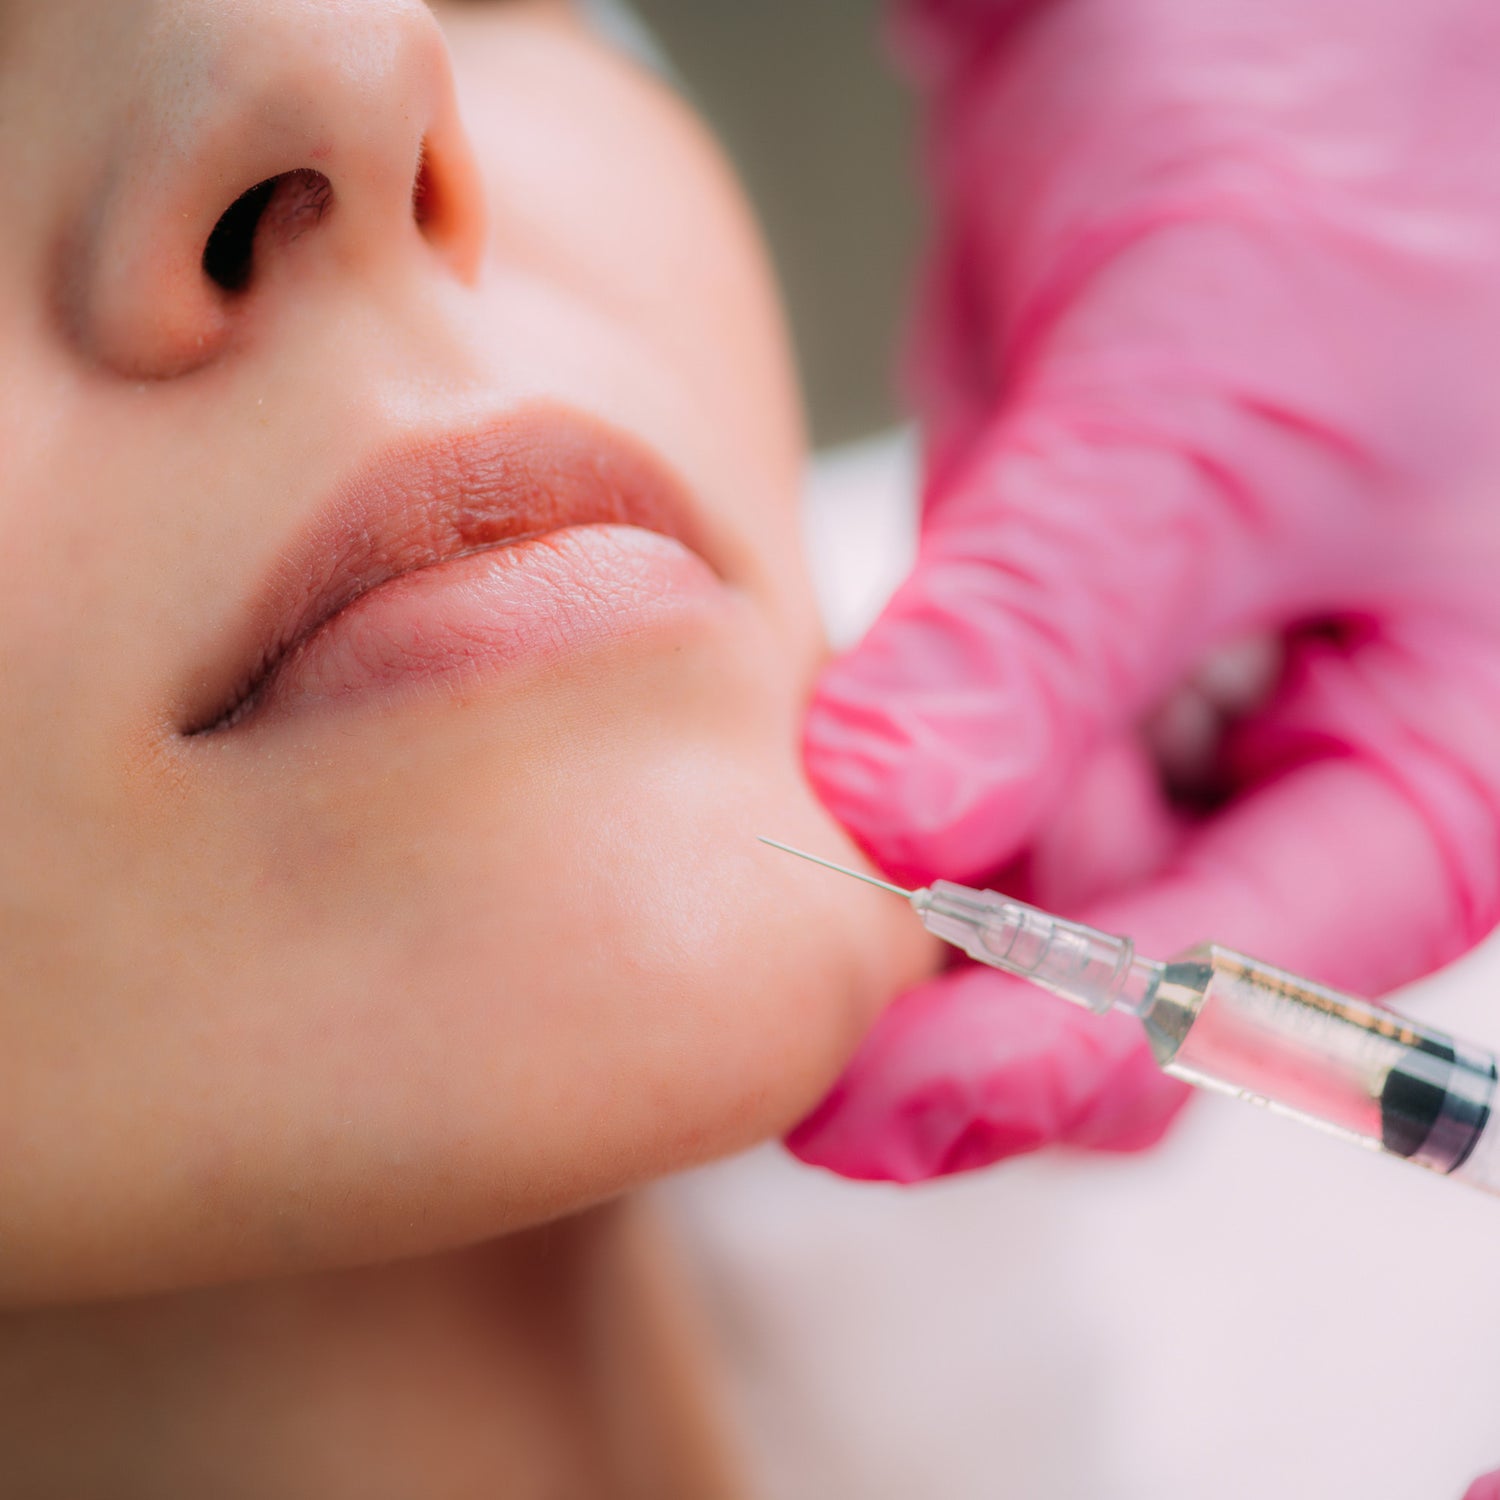 needle with dermal filler being injected in chin